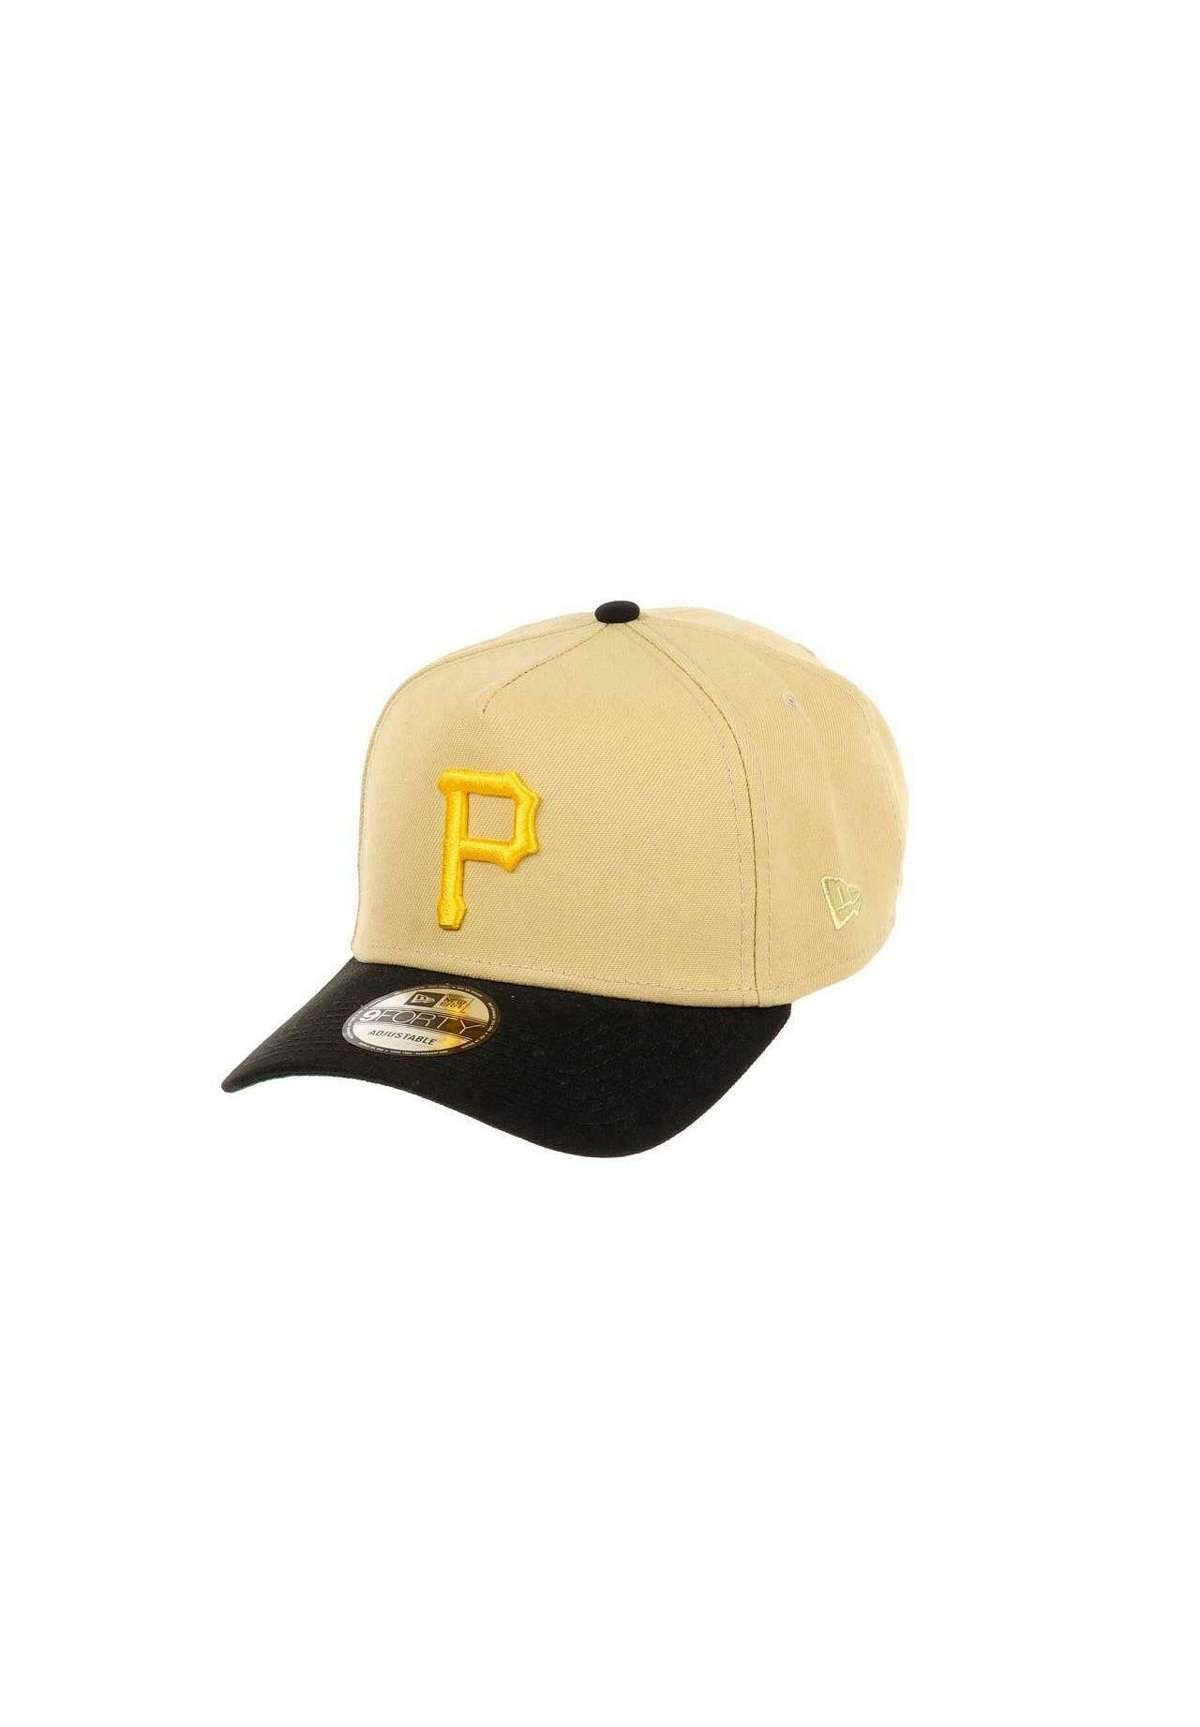 Кепка PITTSBURGH PIRATES MLB ALL-STAR GAME 1994 SIDEPATCH VEGAS 9FORTY A-FRAME SNAPBACK